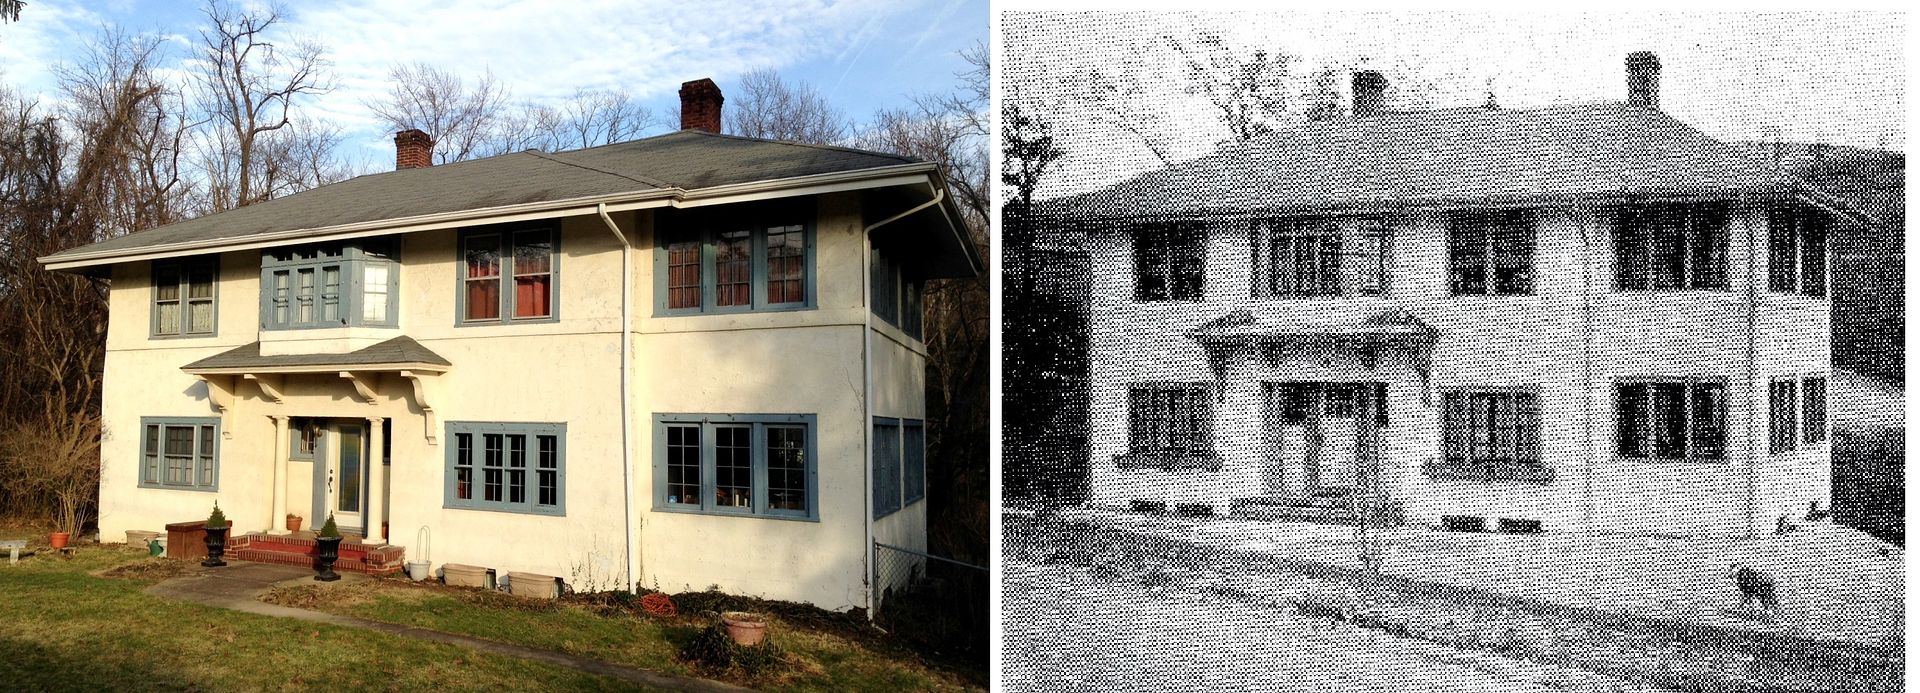 Ah, but heres the most interesting photo of all. This is the Roberts in Wheeling, then and now. Photo is 